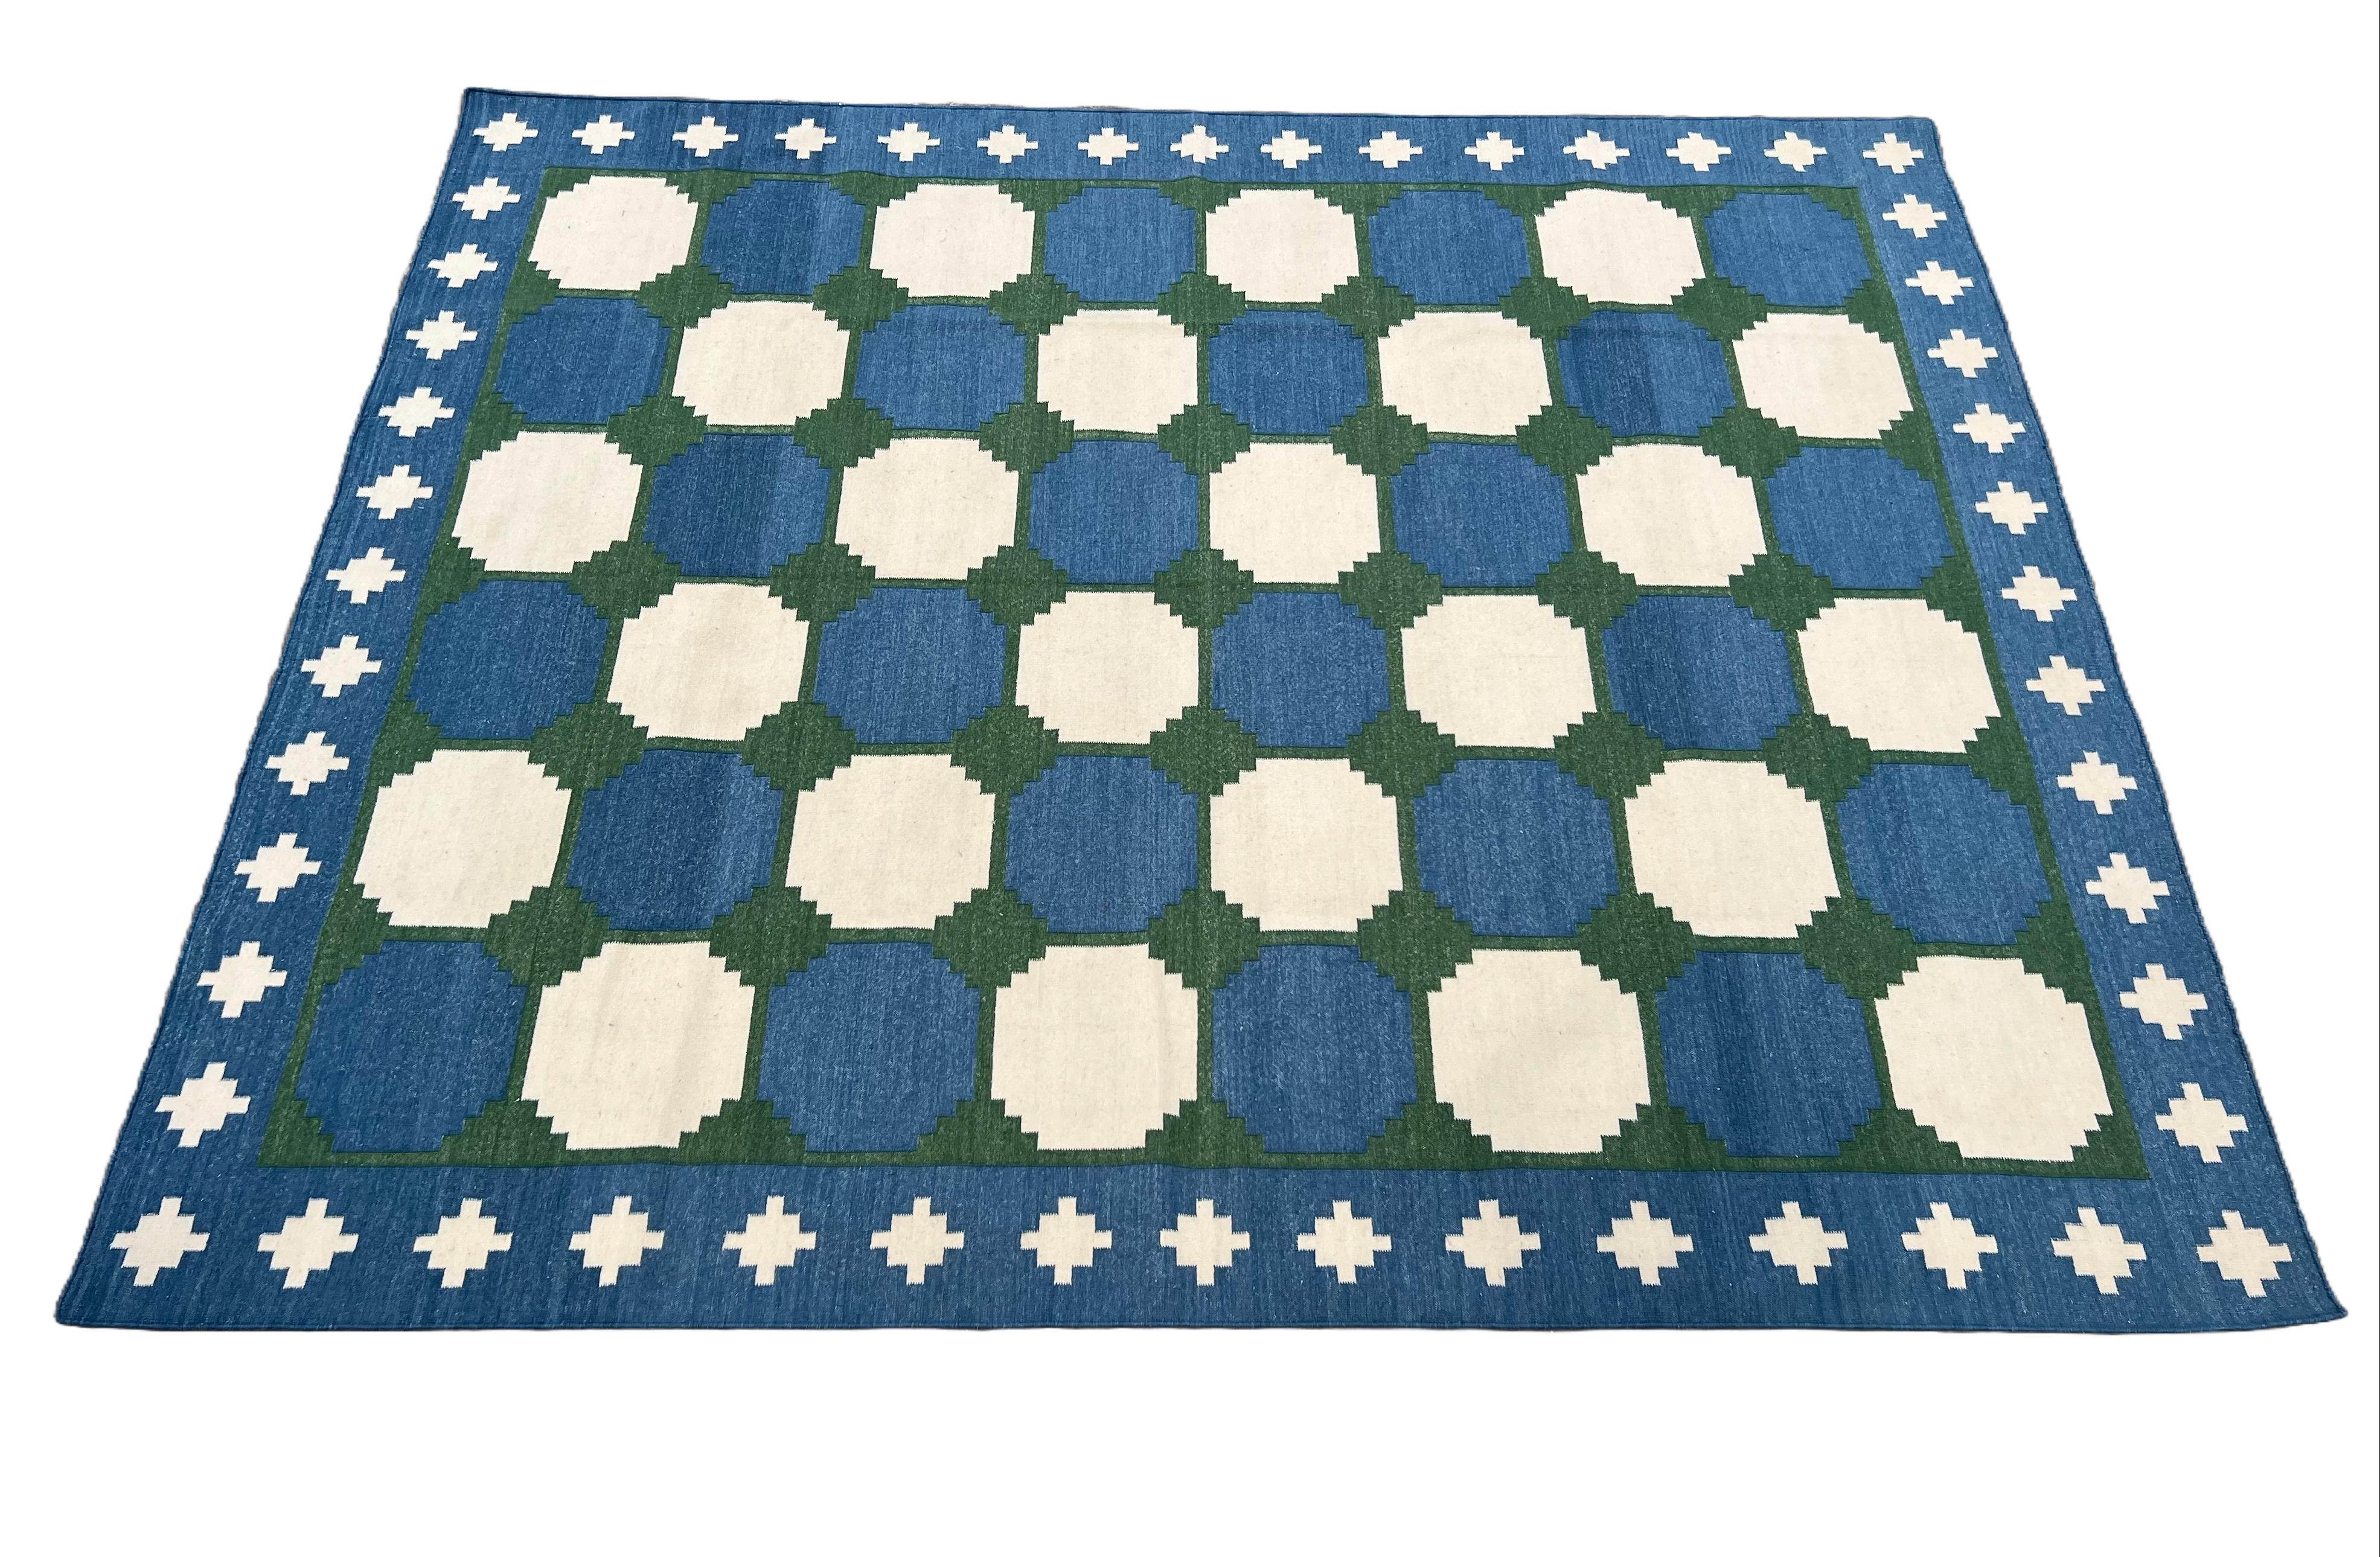 Handmade Woolen Area Flat Weave Rug, 8x10 Blue And Green Tile Patterned Dhurrie For Sale 4